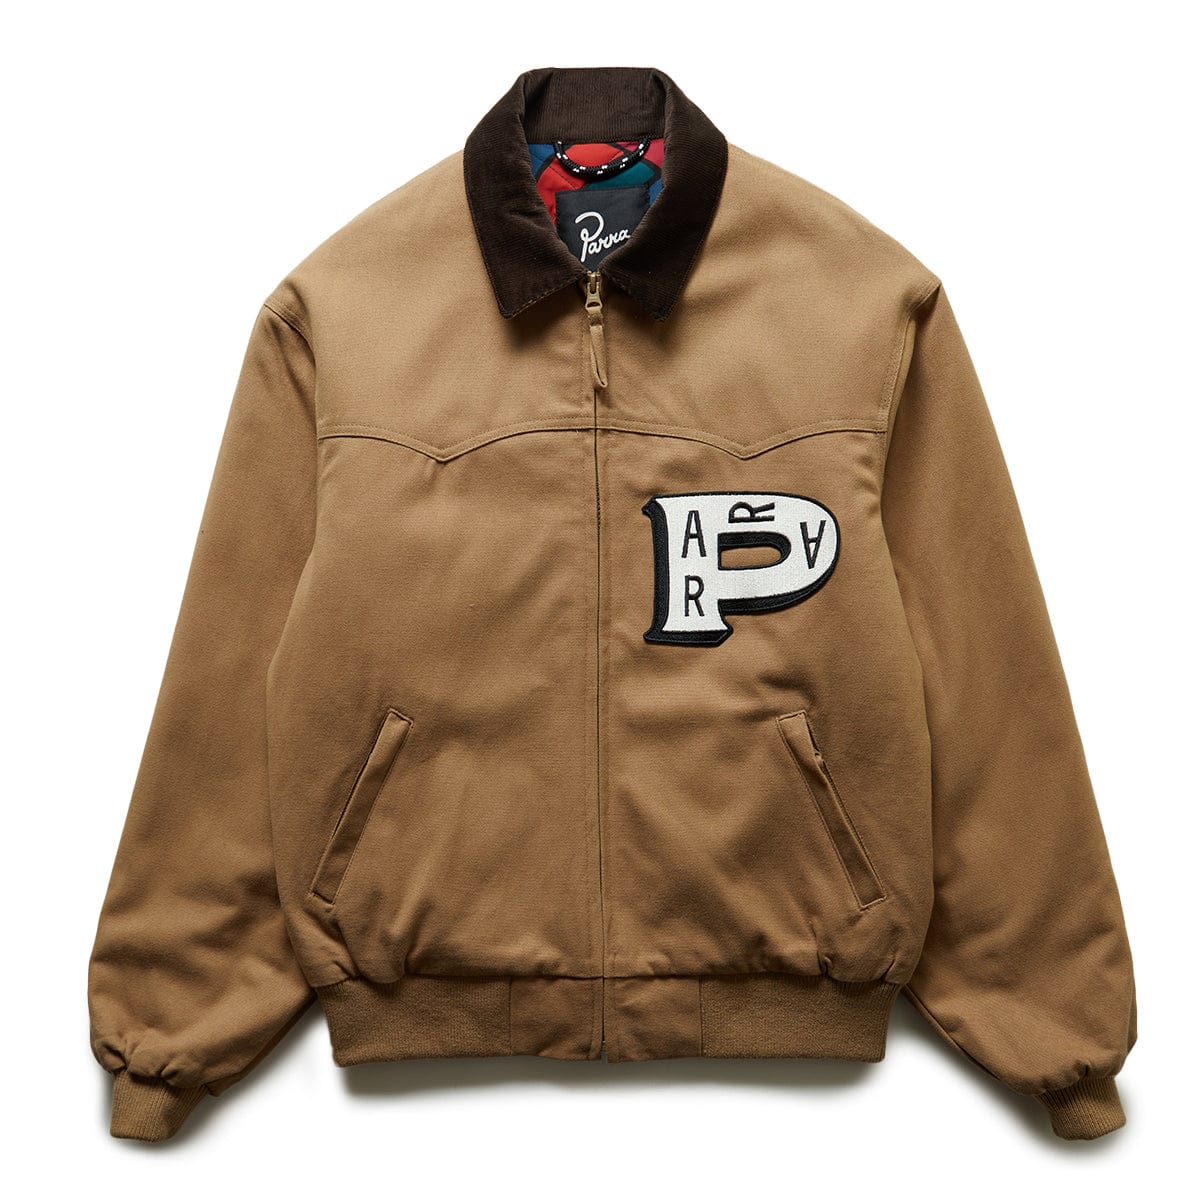 By Parra WORKED P JACKET SAND